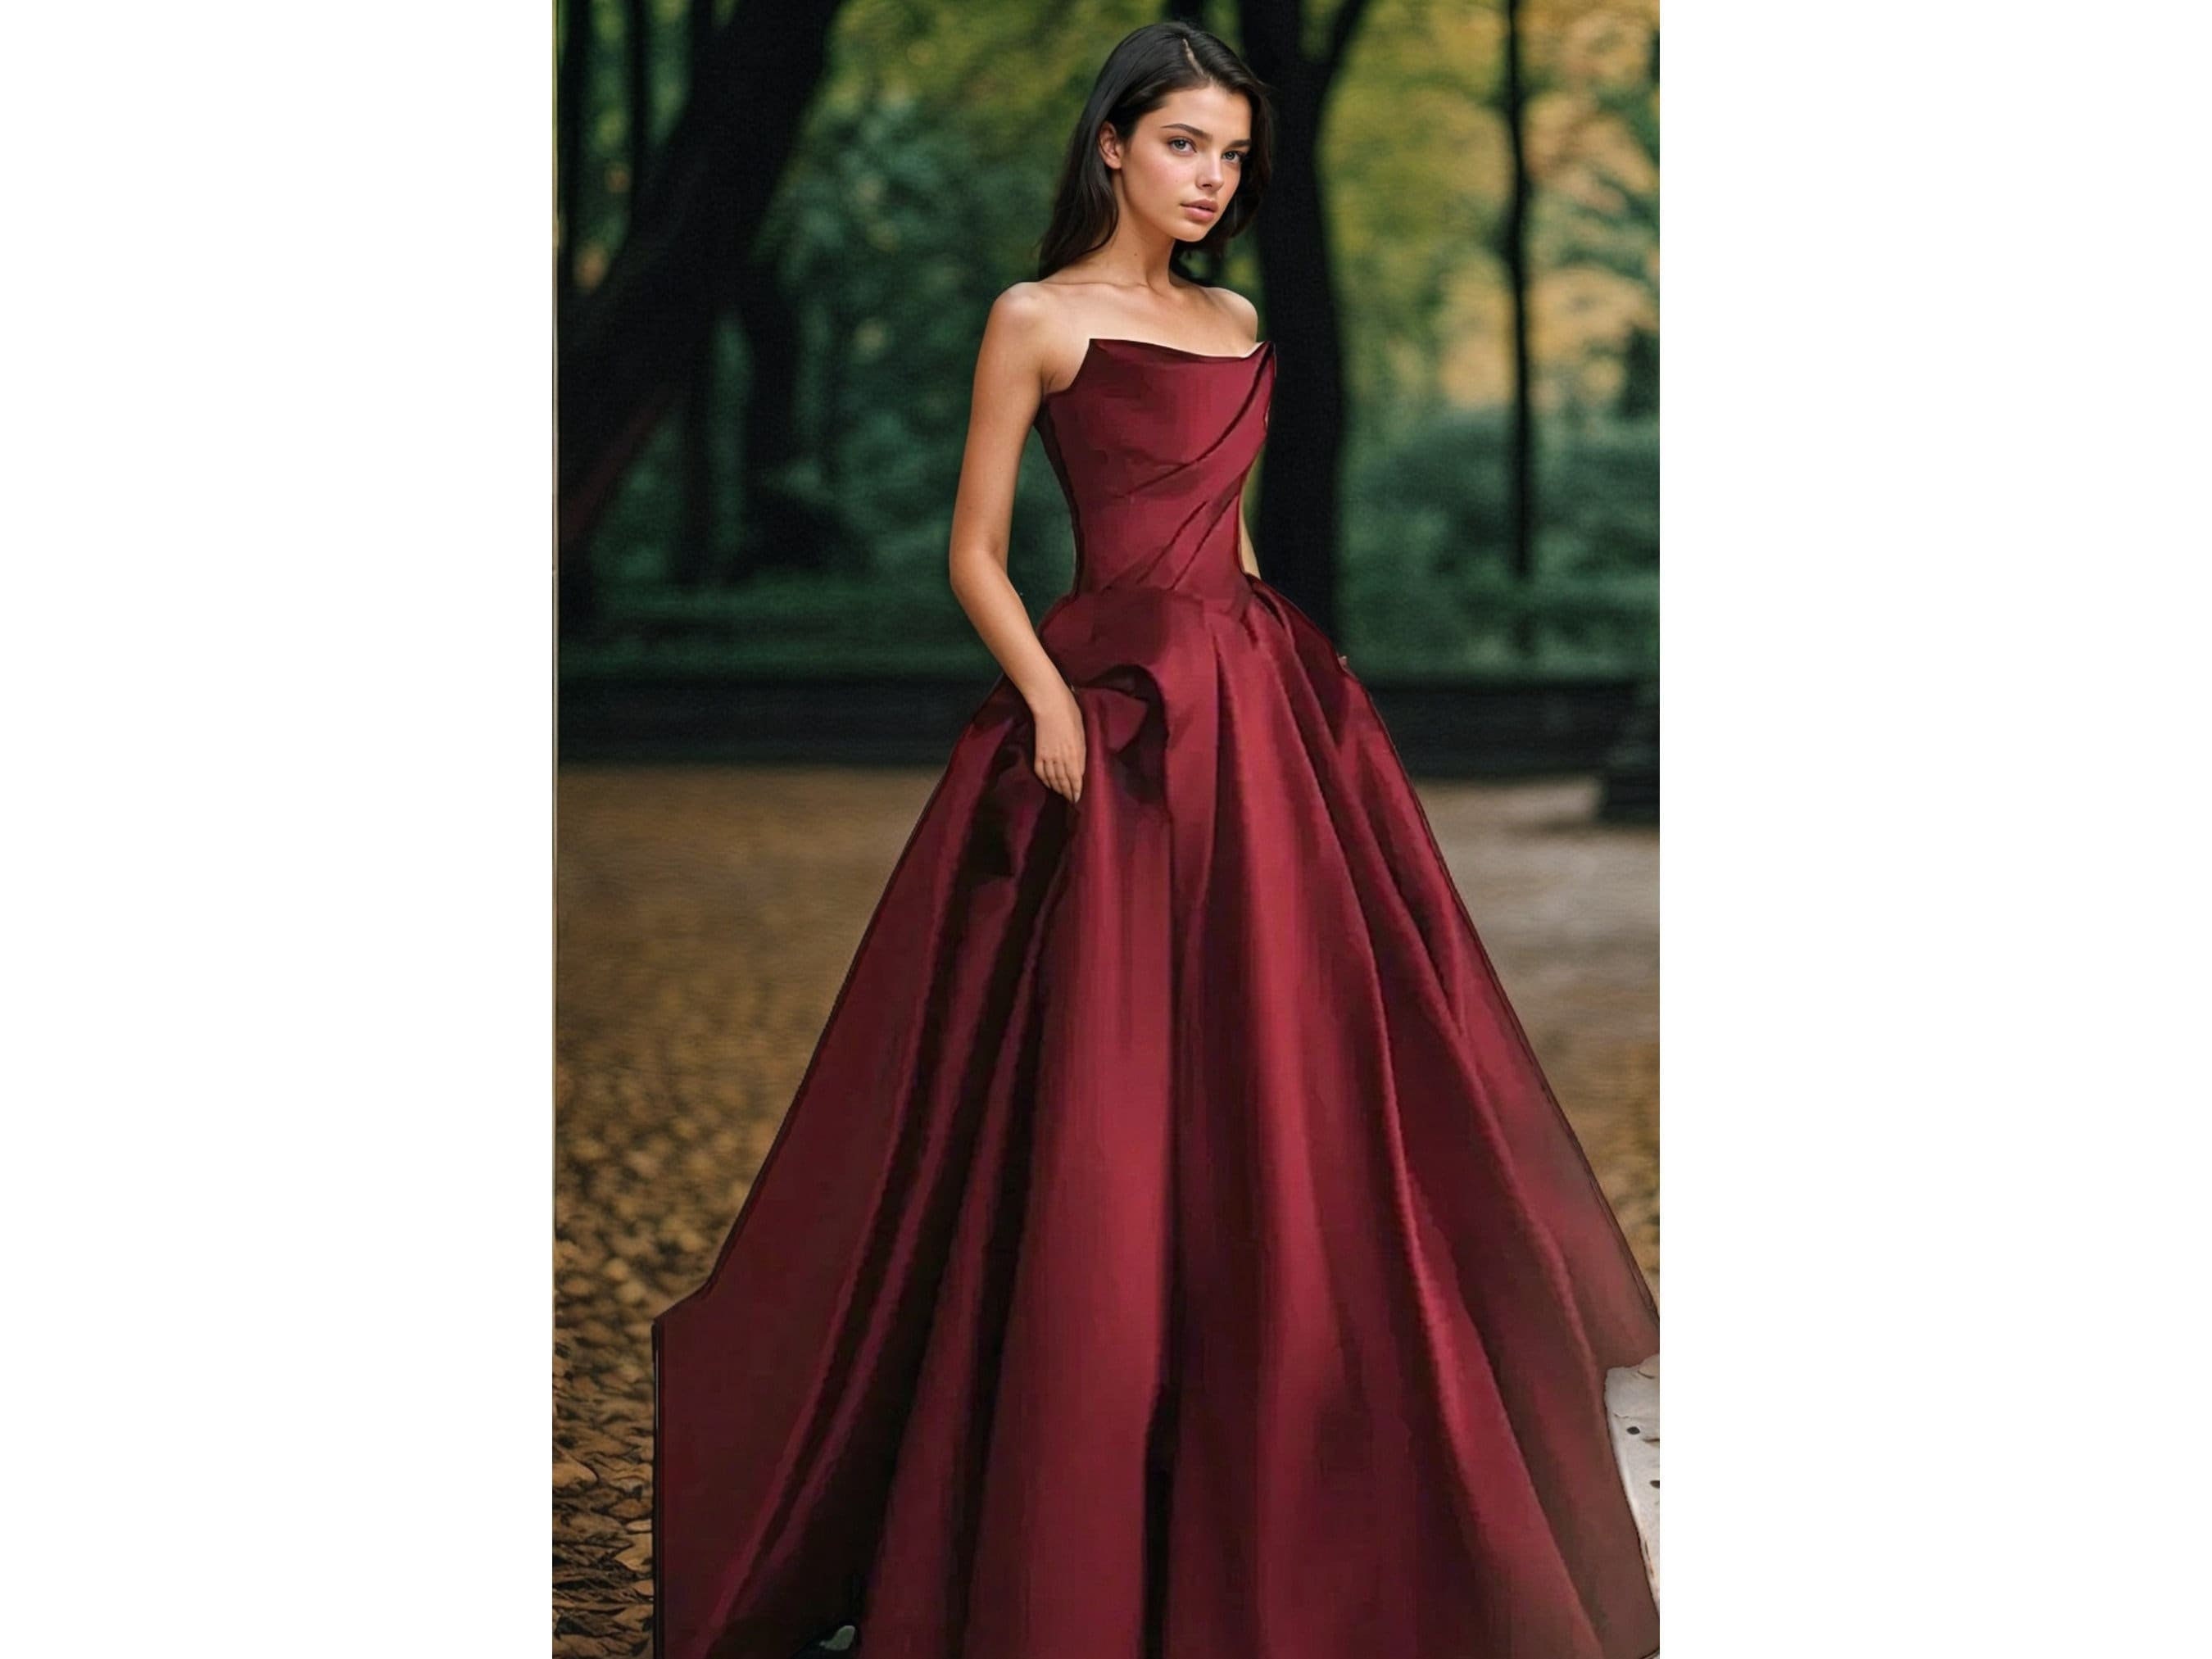 Red Maroon Princess Ball Gown Tulle Wedding Dress Red Prom Dress